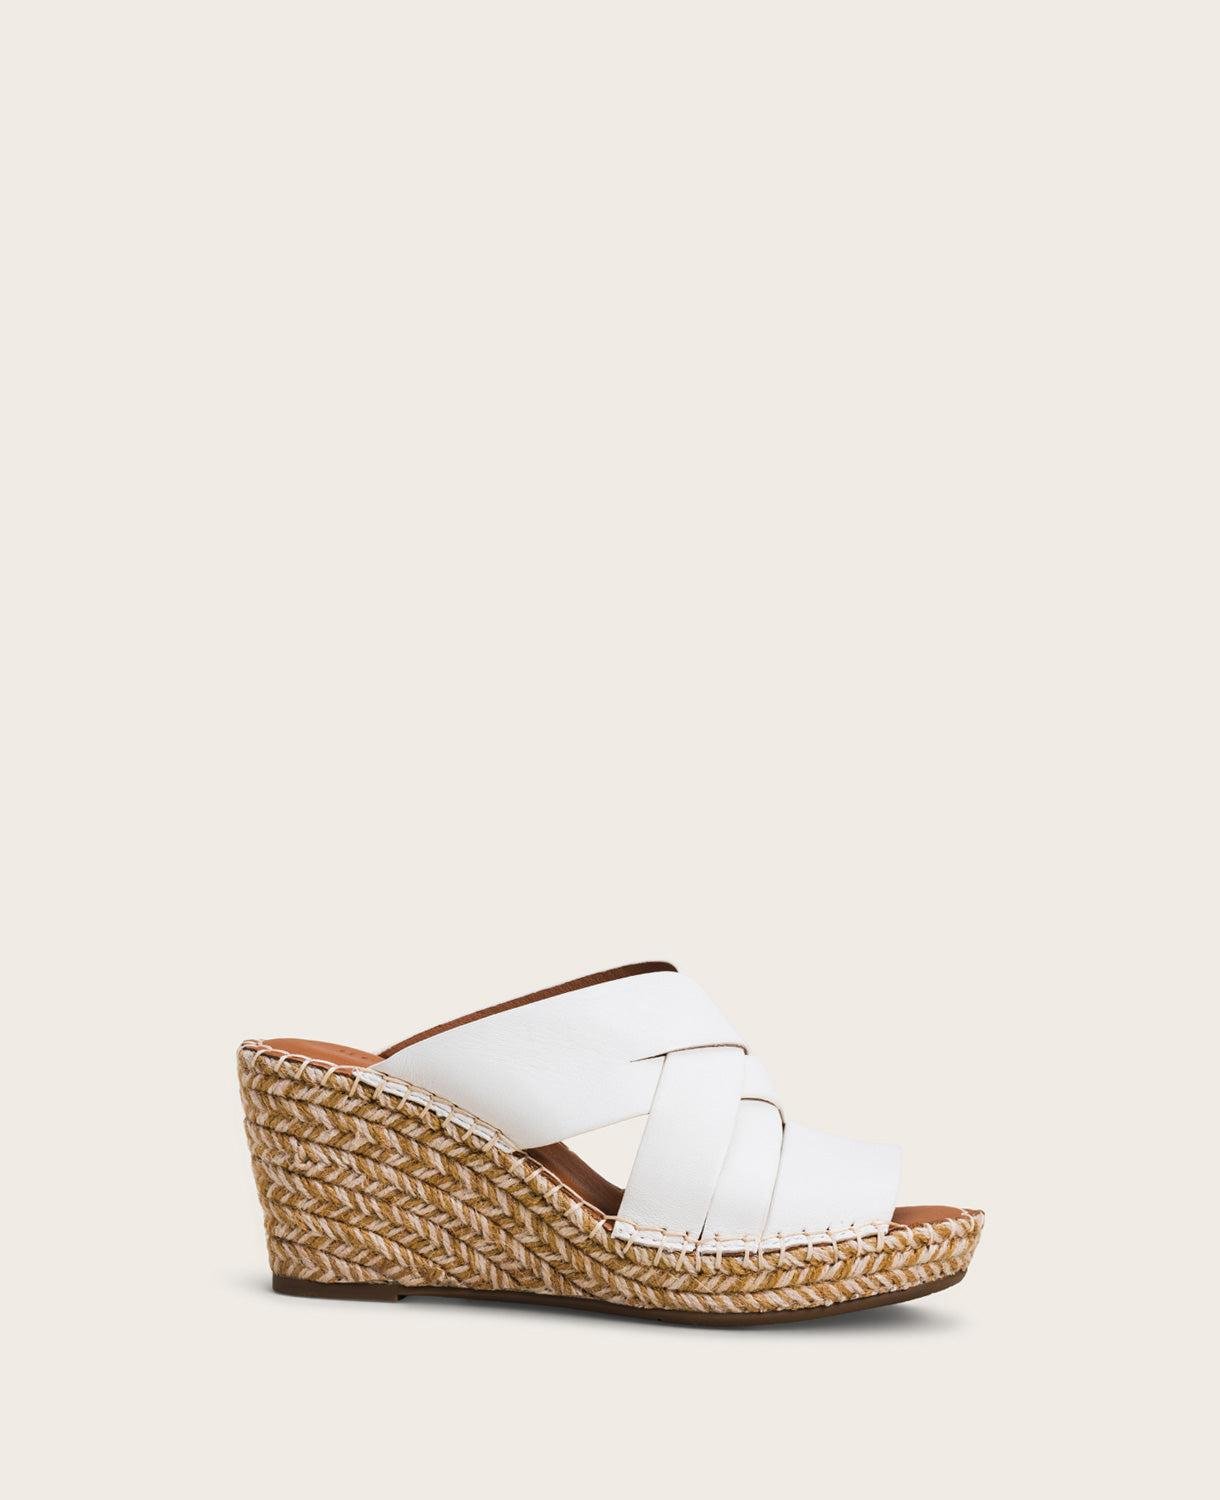 Gentle Souls | Charli Leather Woven Espadrille Wedge by GENTLE SOULS